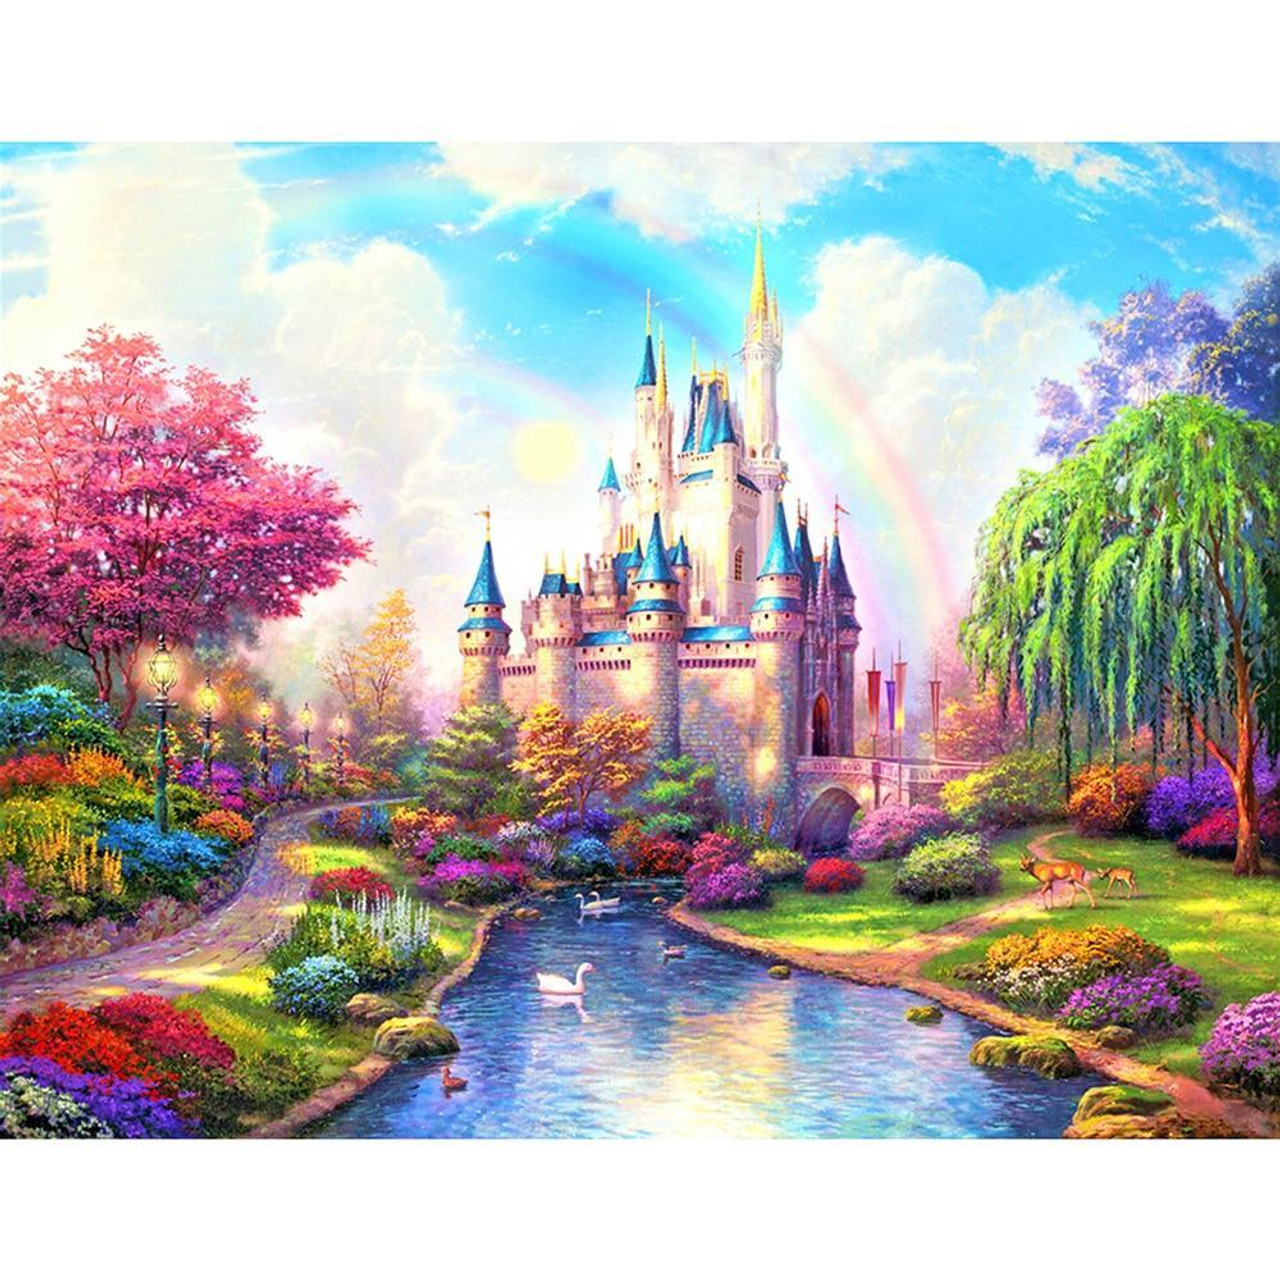 5D Diamond Painting Pink Castle and Moon Kit Offered by Bonanza